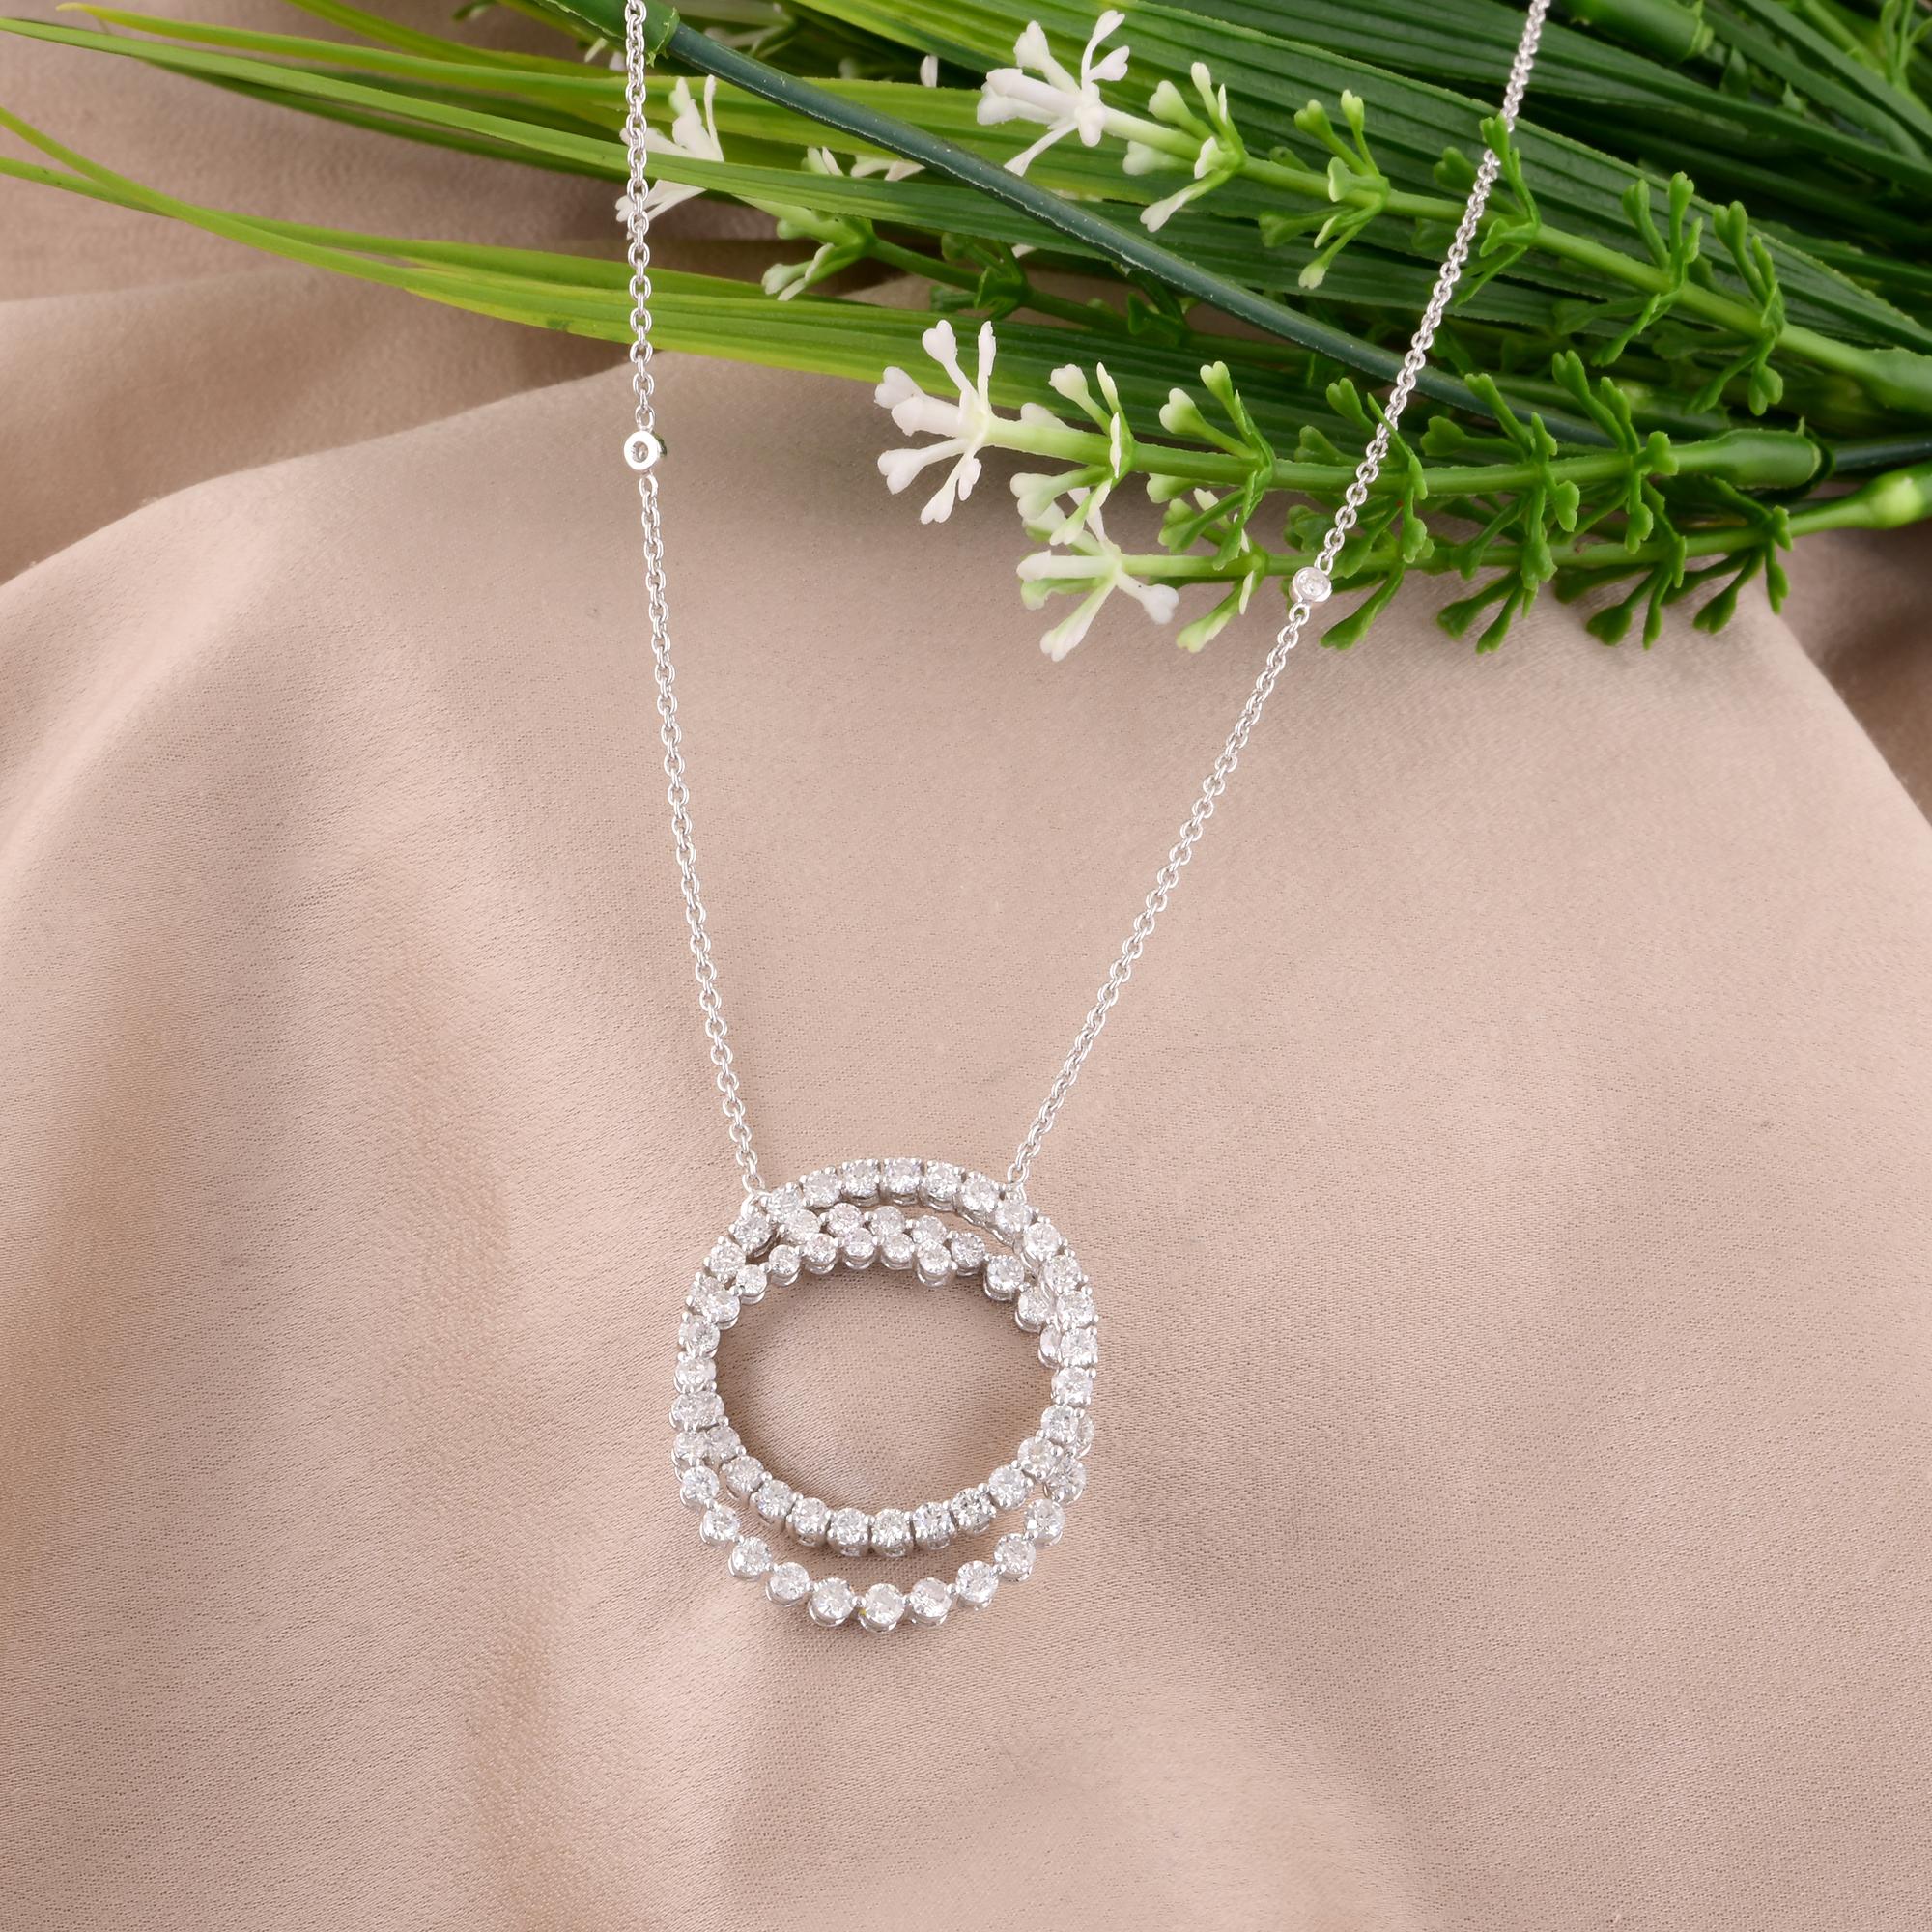 Introducing a truly enchanting piece of handmade jewelry: the real 2.36 carat round diamond charm pendant, elegantly crafted in luxurious 14 karat white gold. This exquisite pendant is more than just an accessory; it's a symbol of elegance,